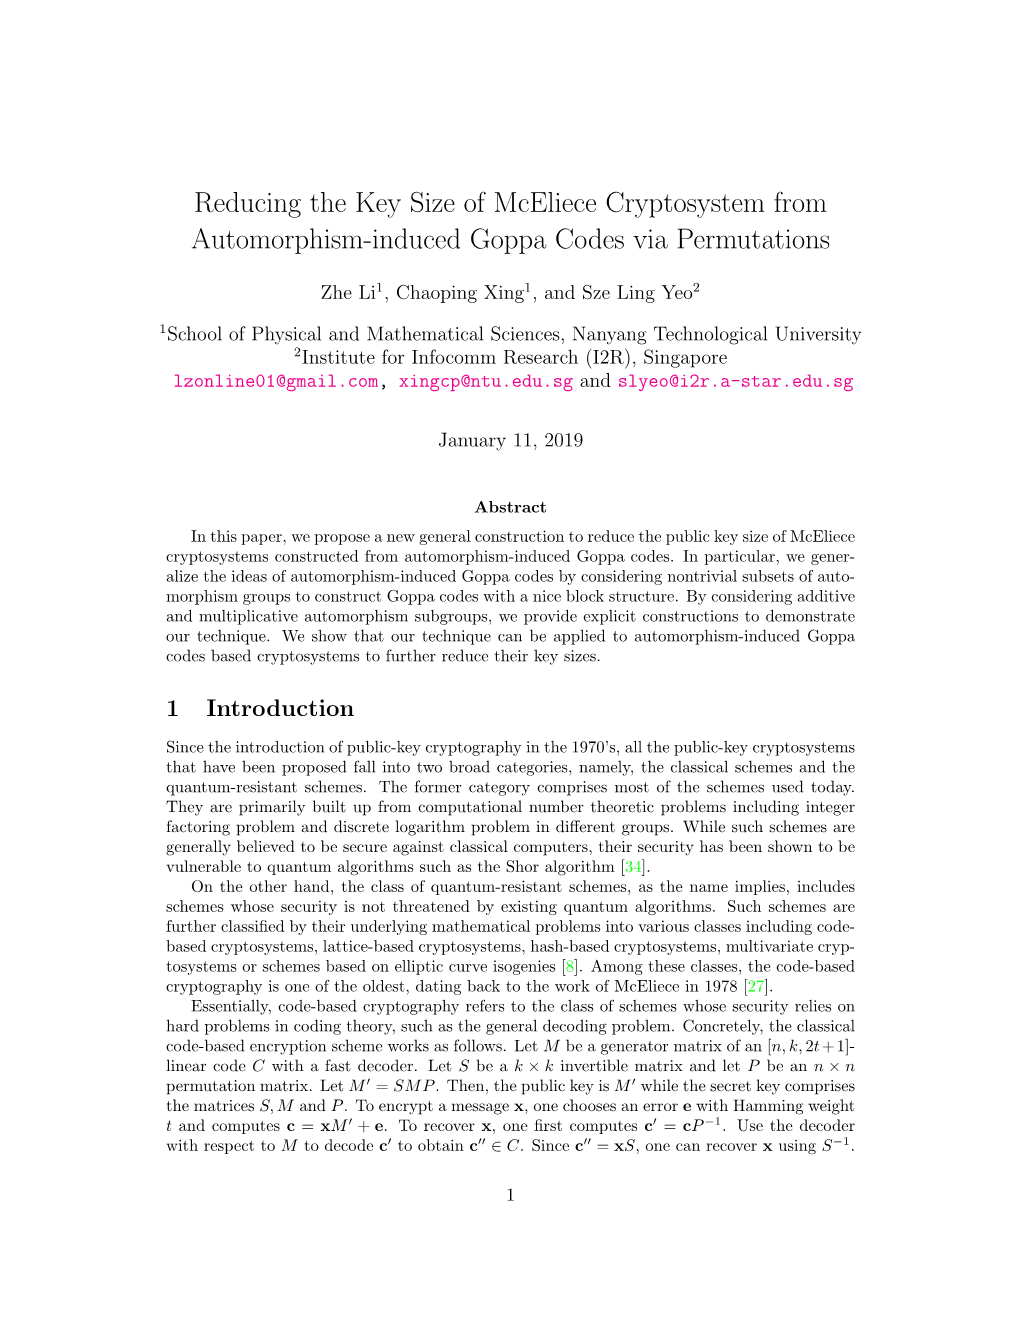 Reducing the Key Size of Mceliece Cryptosystem from Automorphism-Induced Goppa Codes Via Permutations